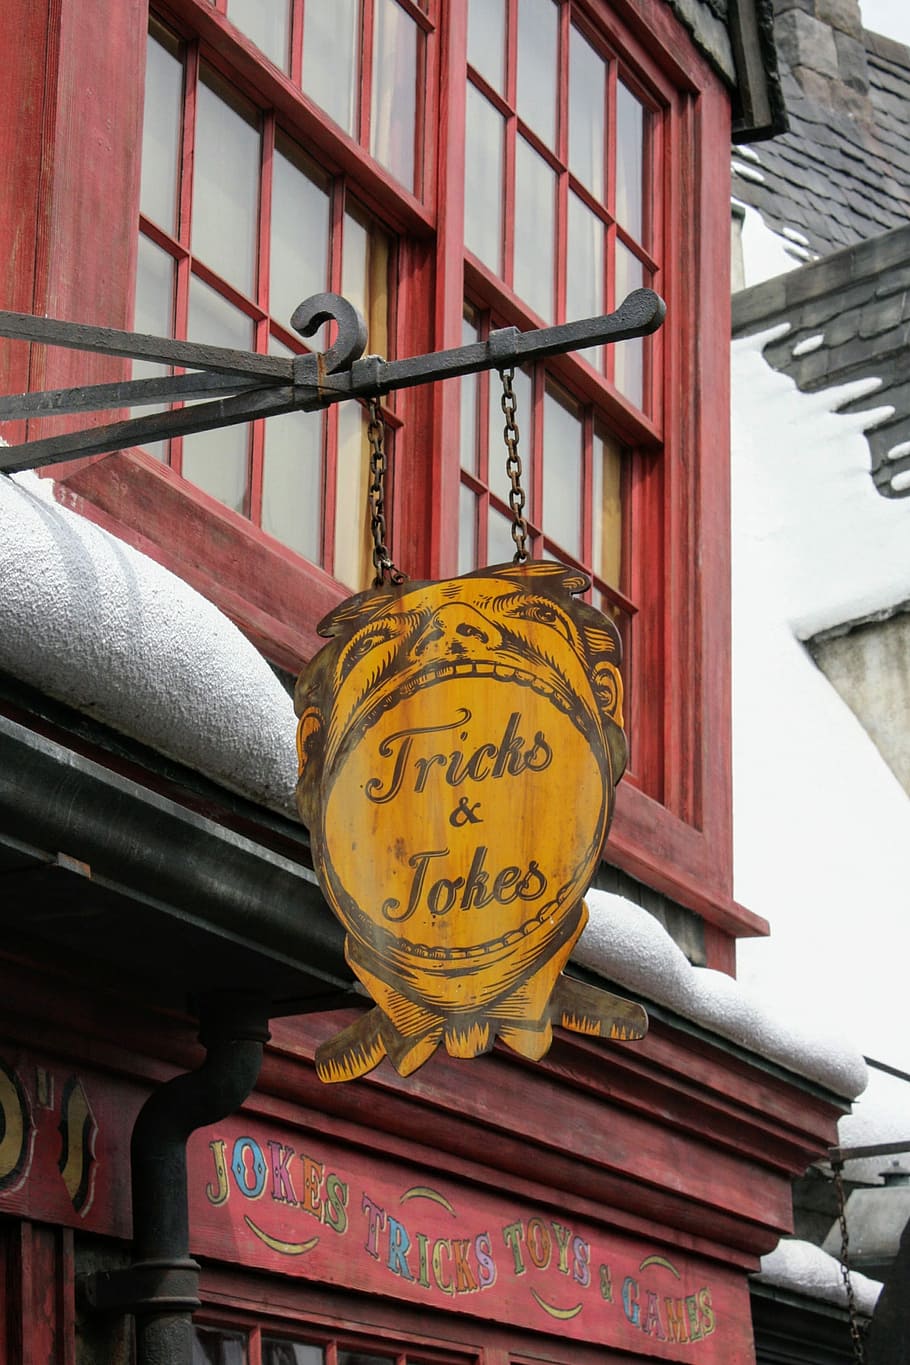 tricks, &, jokes signage, building, old, art, journey, design decoration, outdoors, any person not